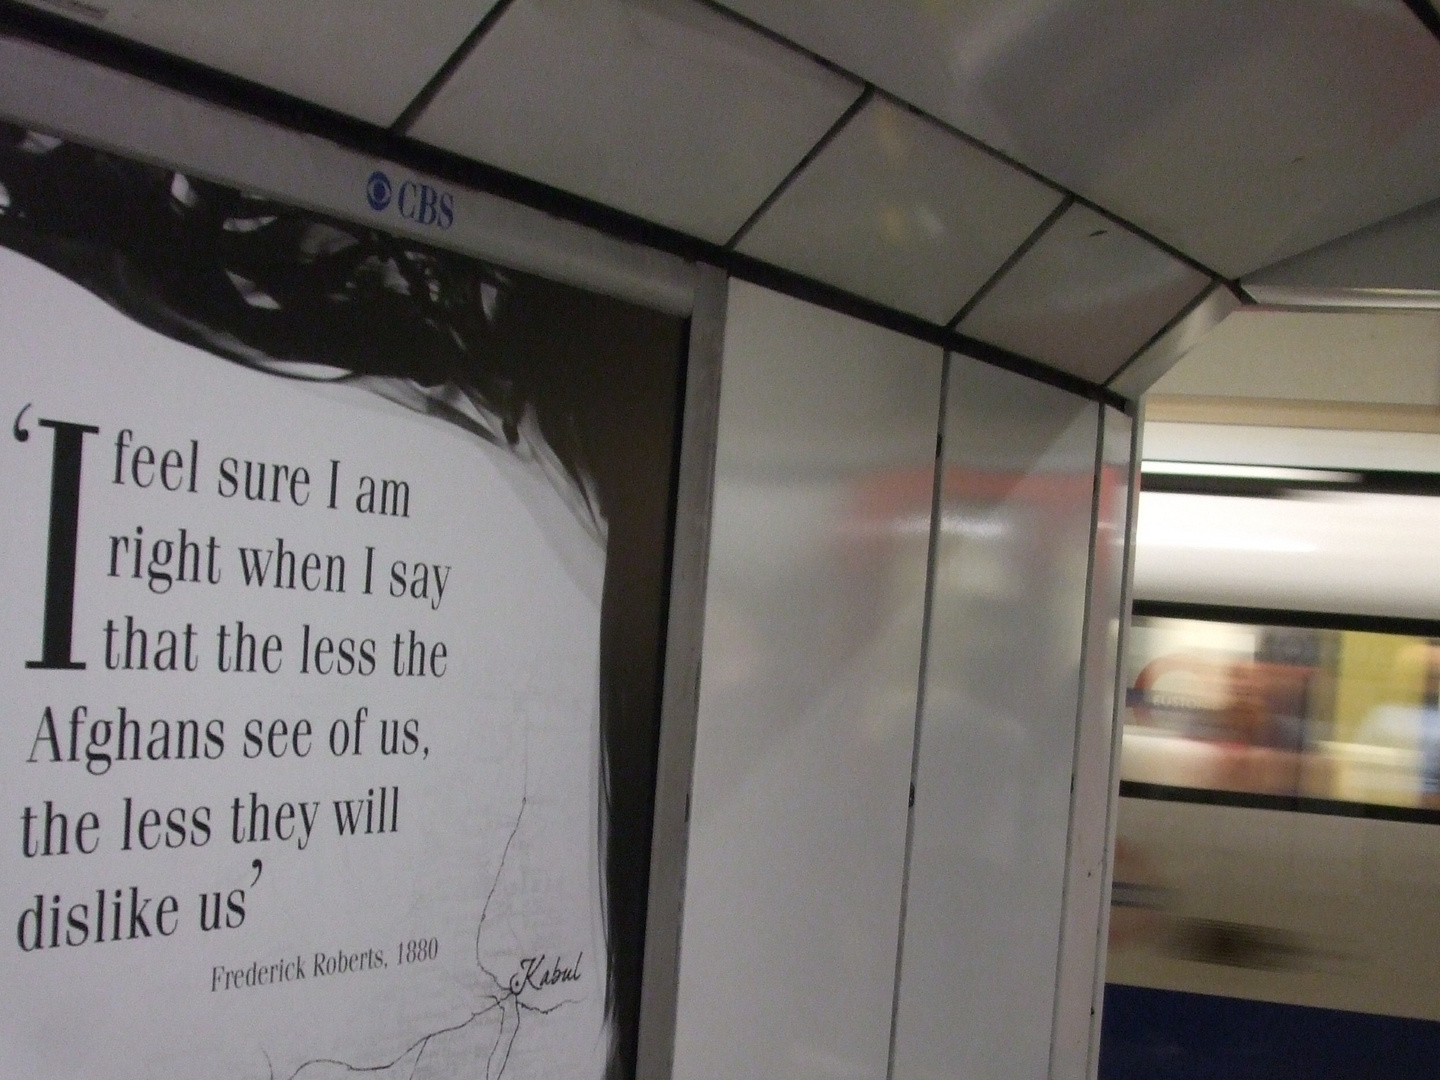 London underground- with a message.